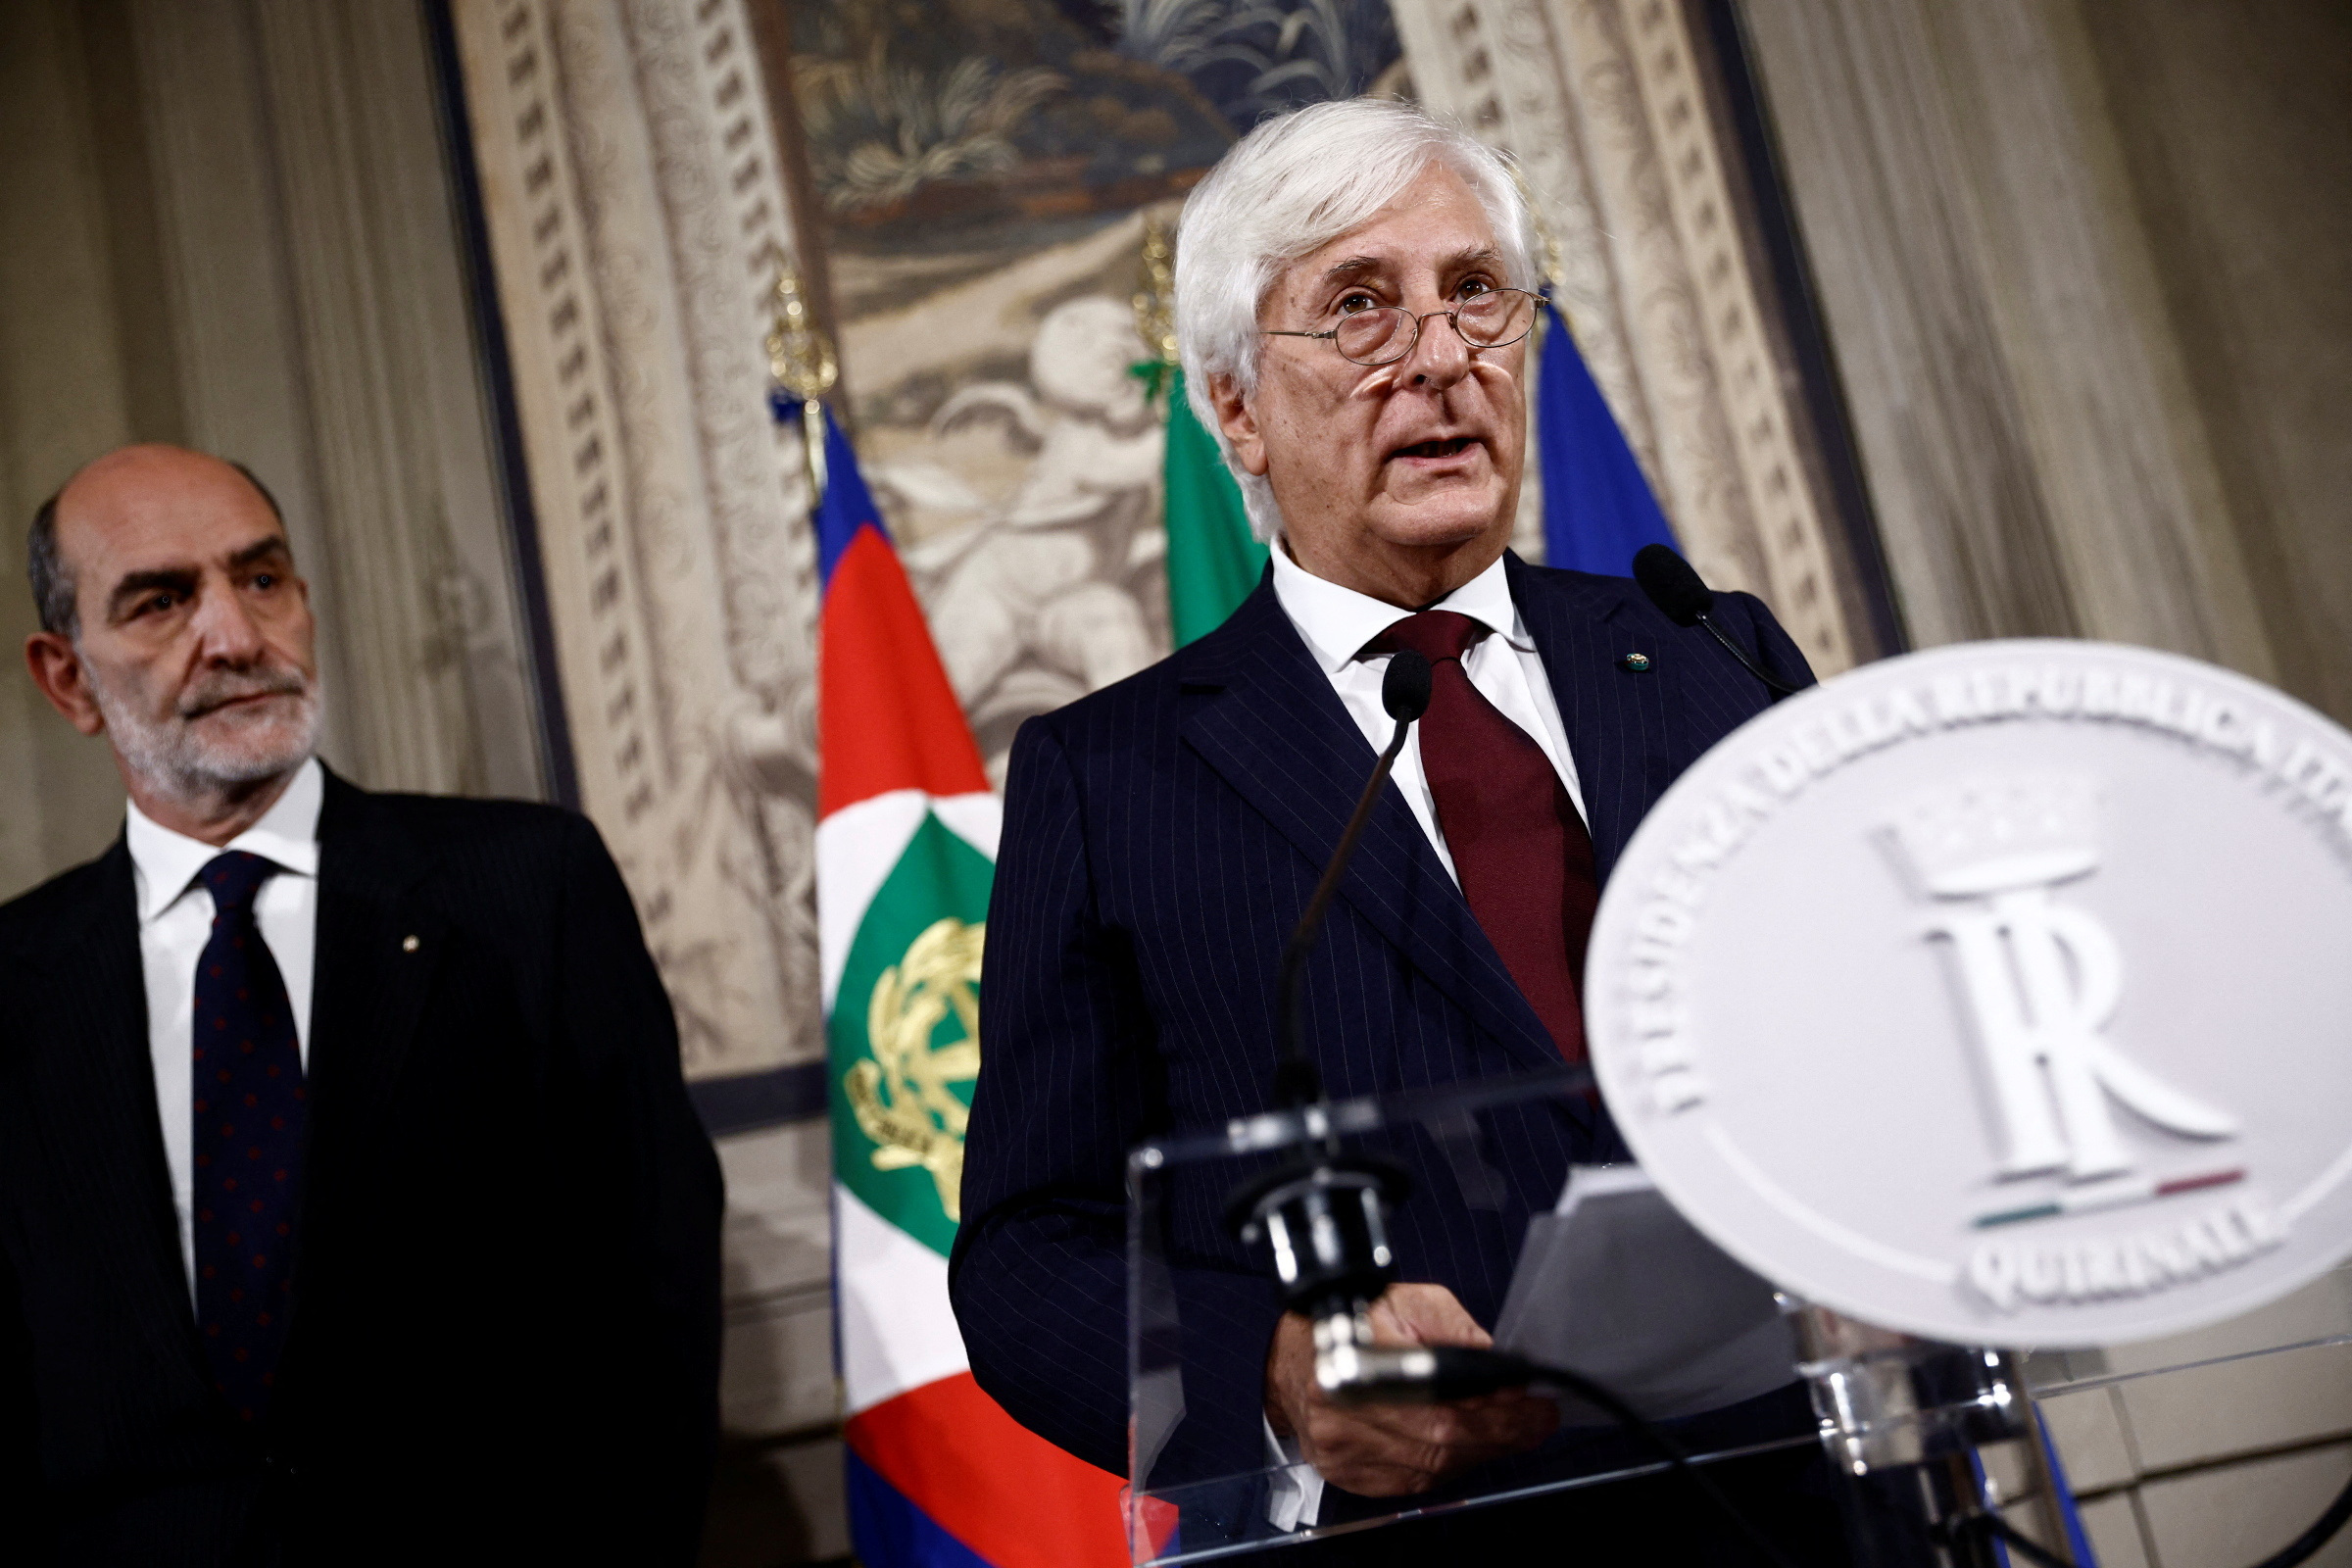 Italian President Mattarella meets leaders of the conservative bloc that won the 2022 general election, in Rome